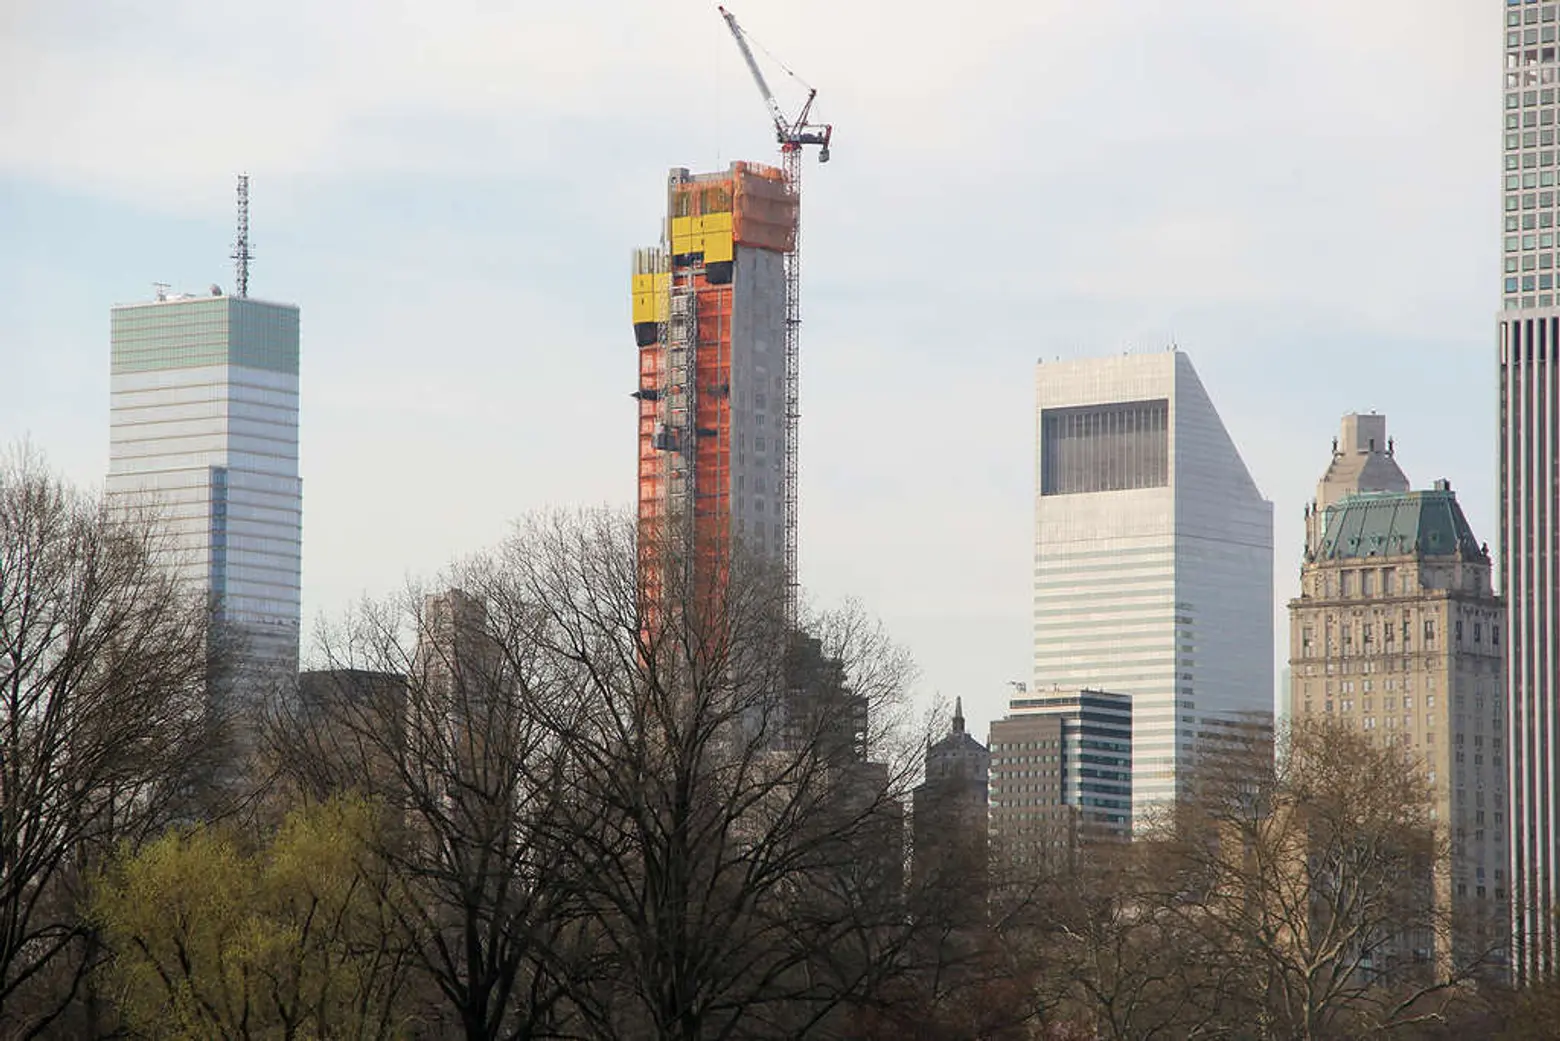 Robert A.M. Stern’s 520 Park Avenue, Upper East Side’s tallest building, hits pinnacle height